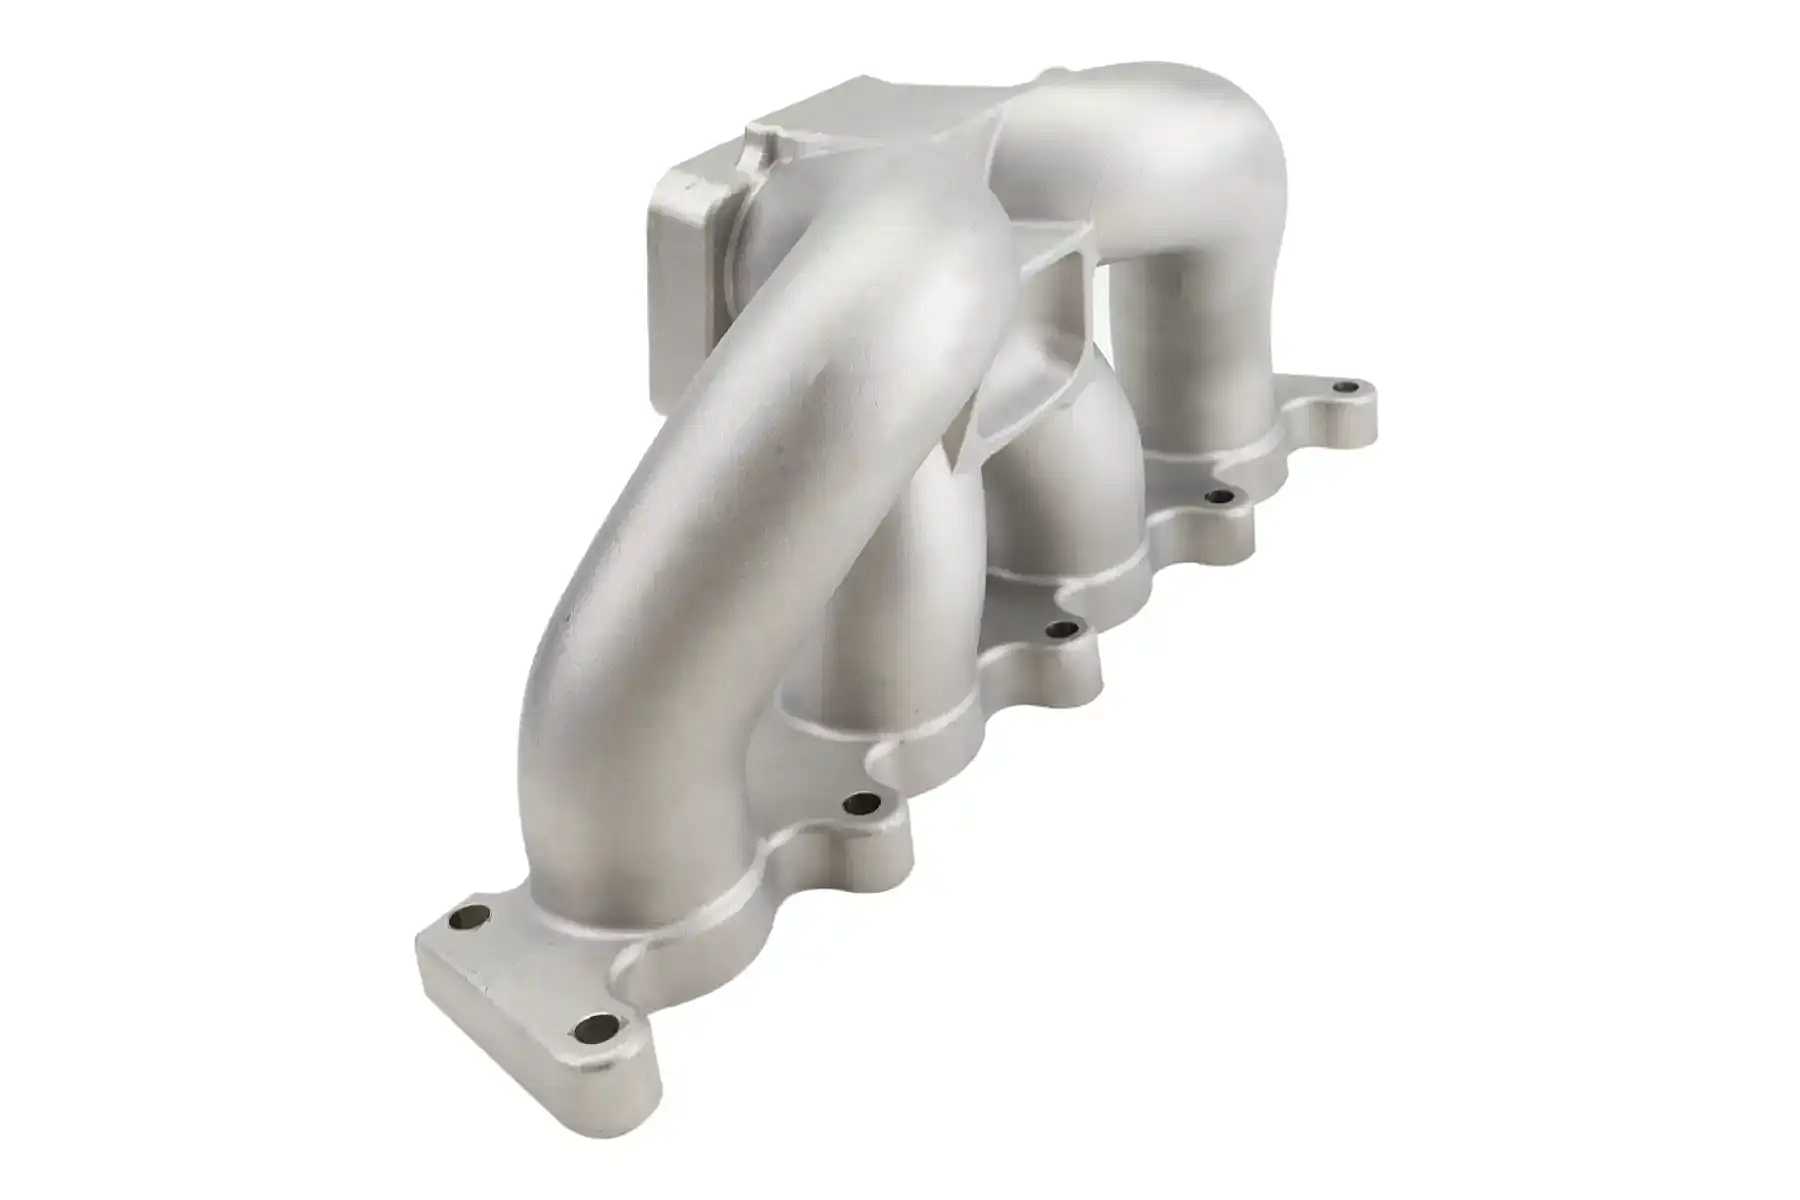 1.8T Top Mount Turbo Manifold Slotted T25